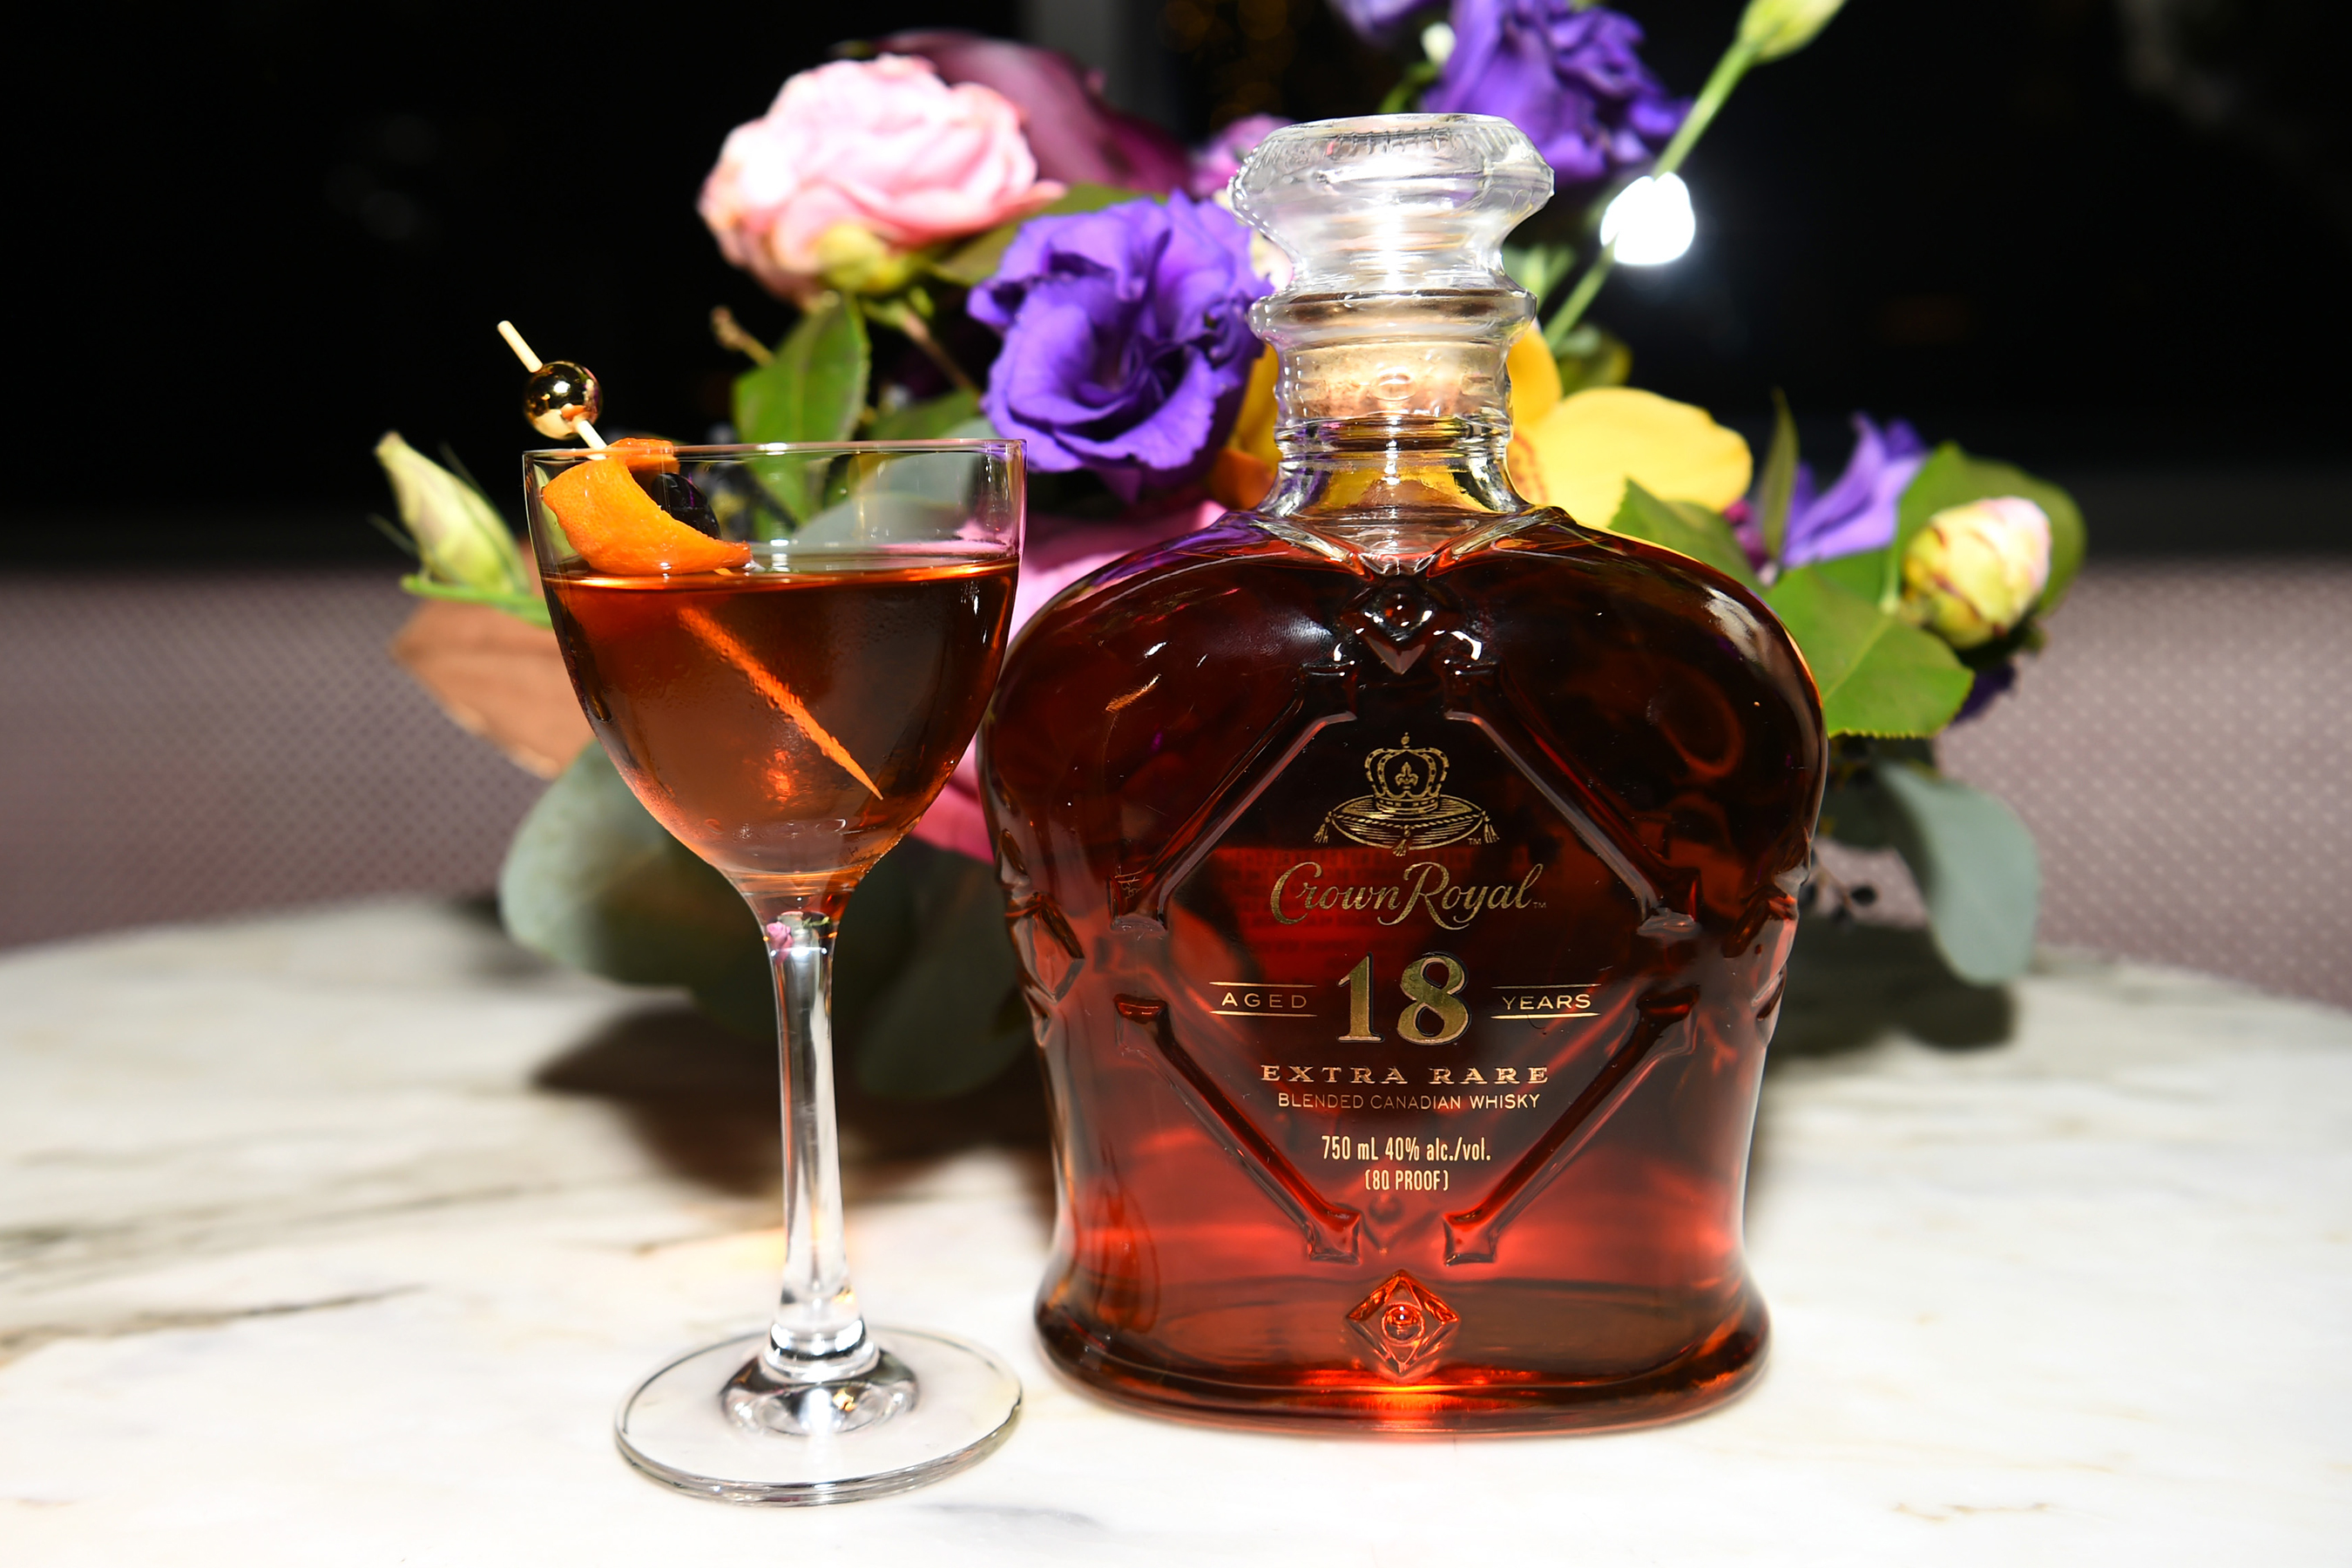 Guests 21+ sipped on Crown Royal Aged 18 Years at an official launch event in Atlanta.